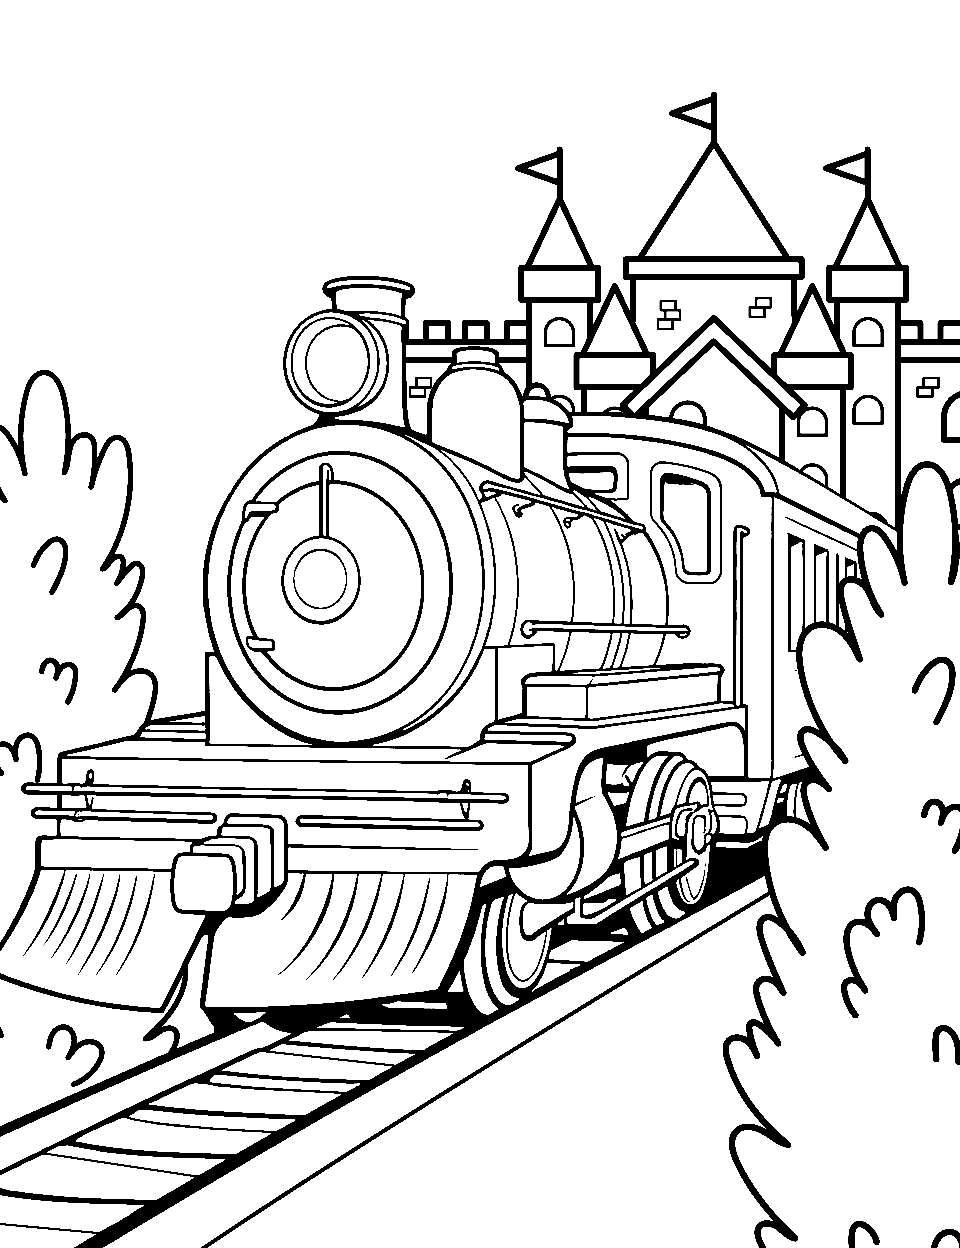 Medieval Castle Train Coloring Page - A train passing by a grand medieval castle.